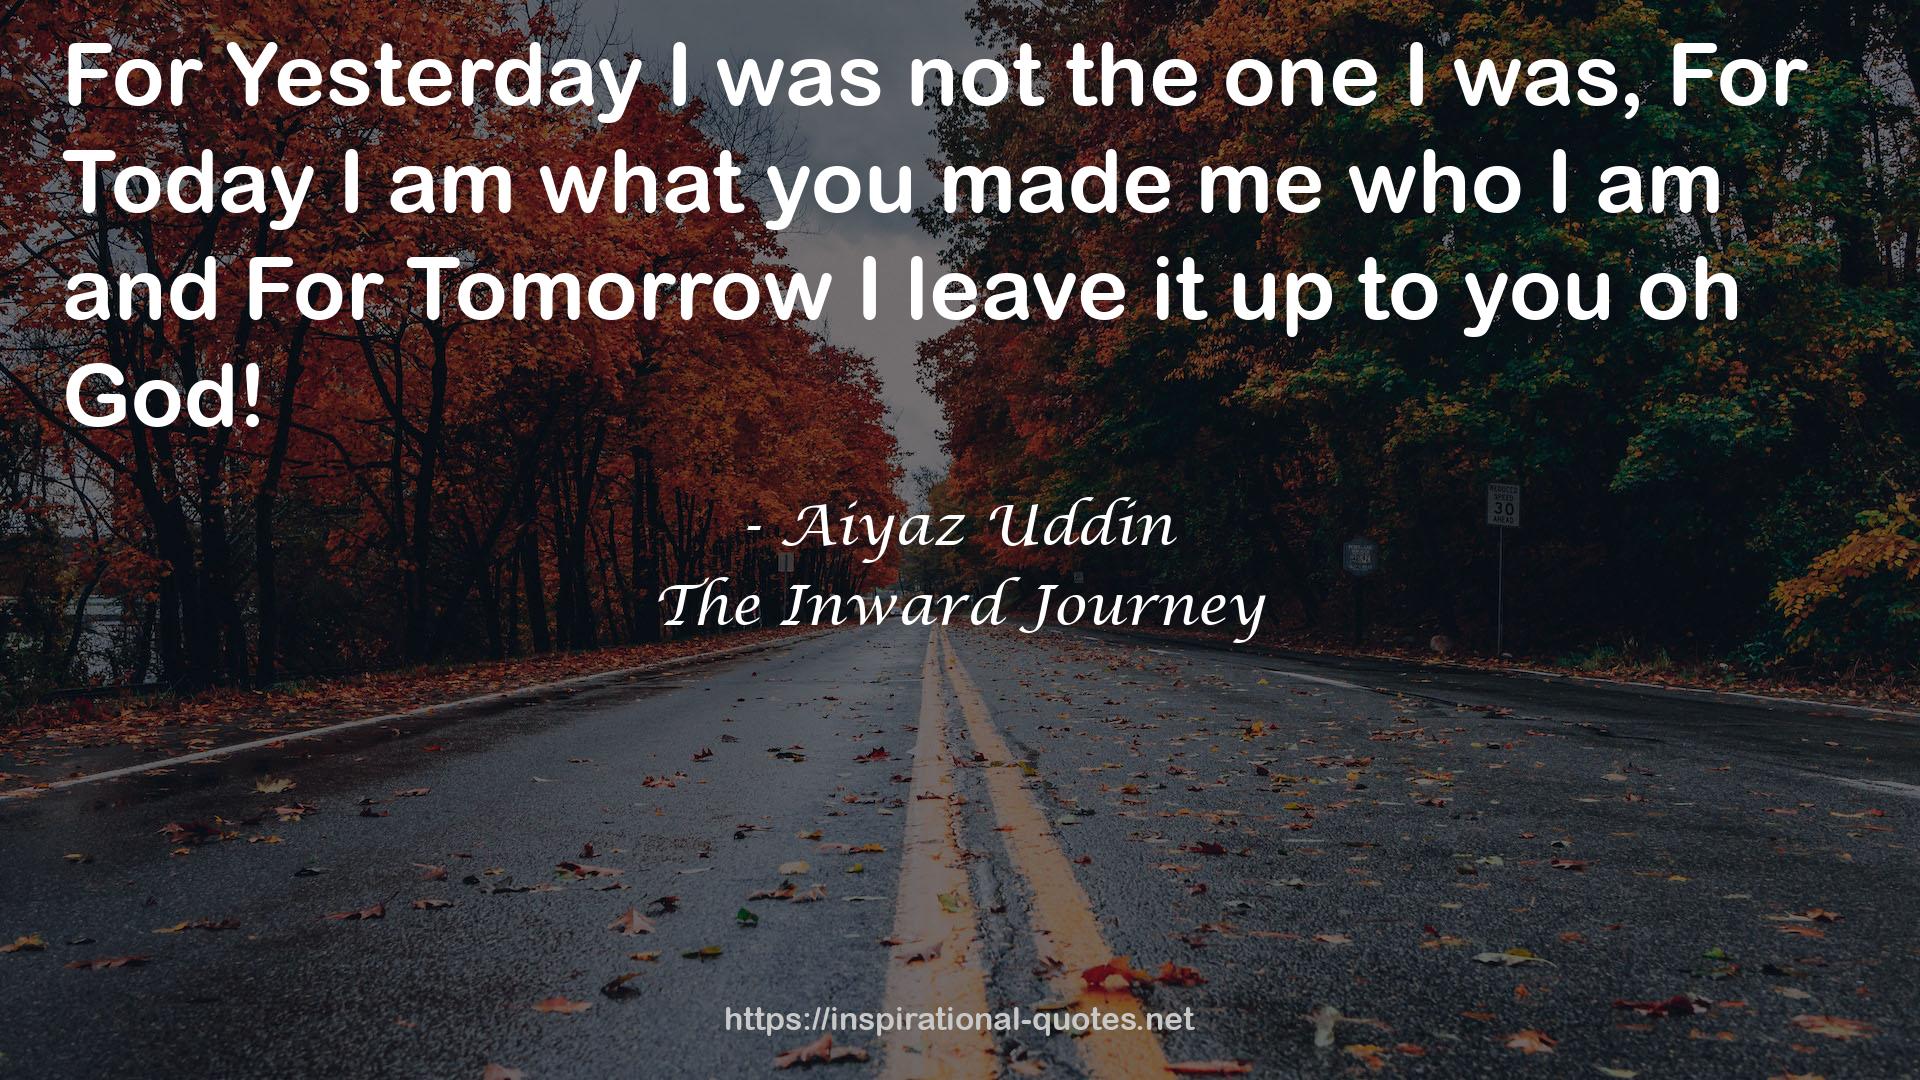 The Inward Journey QUOTES